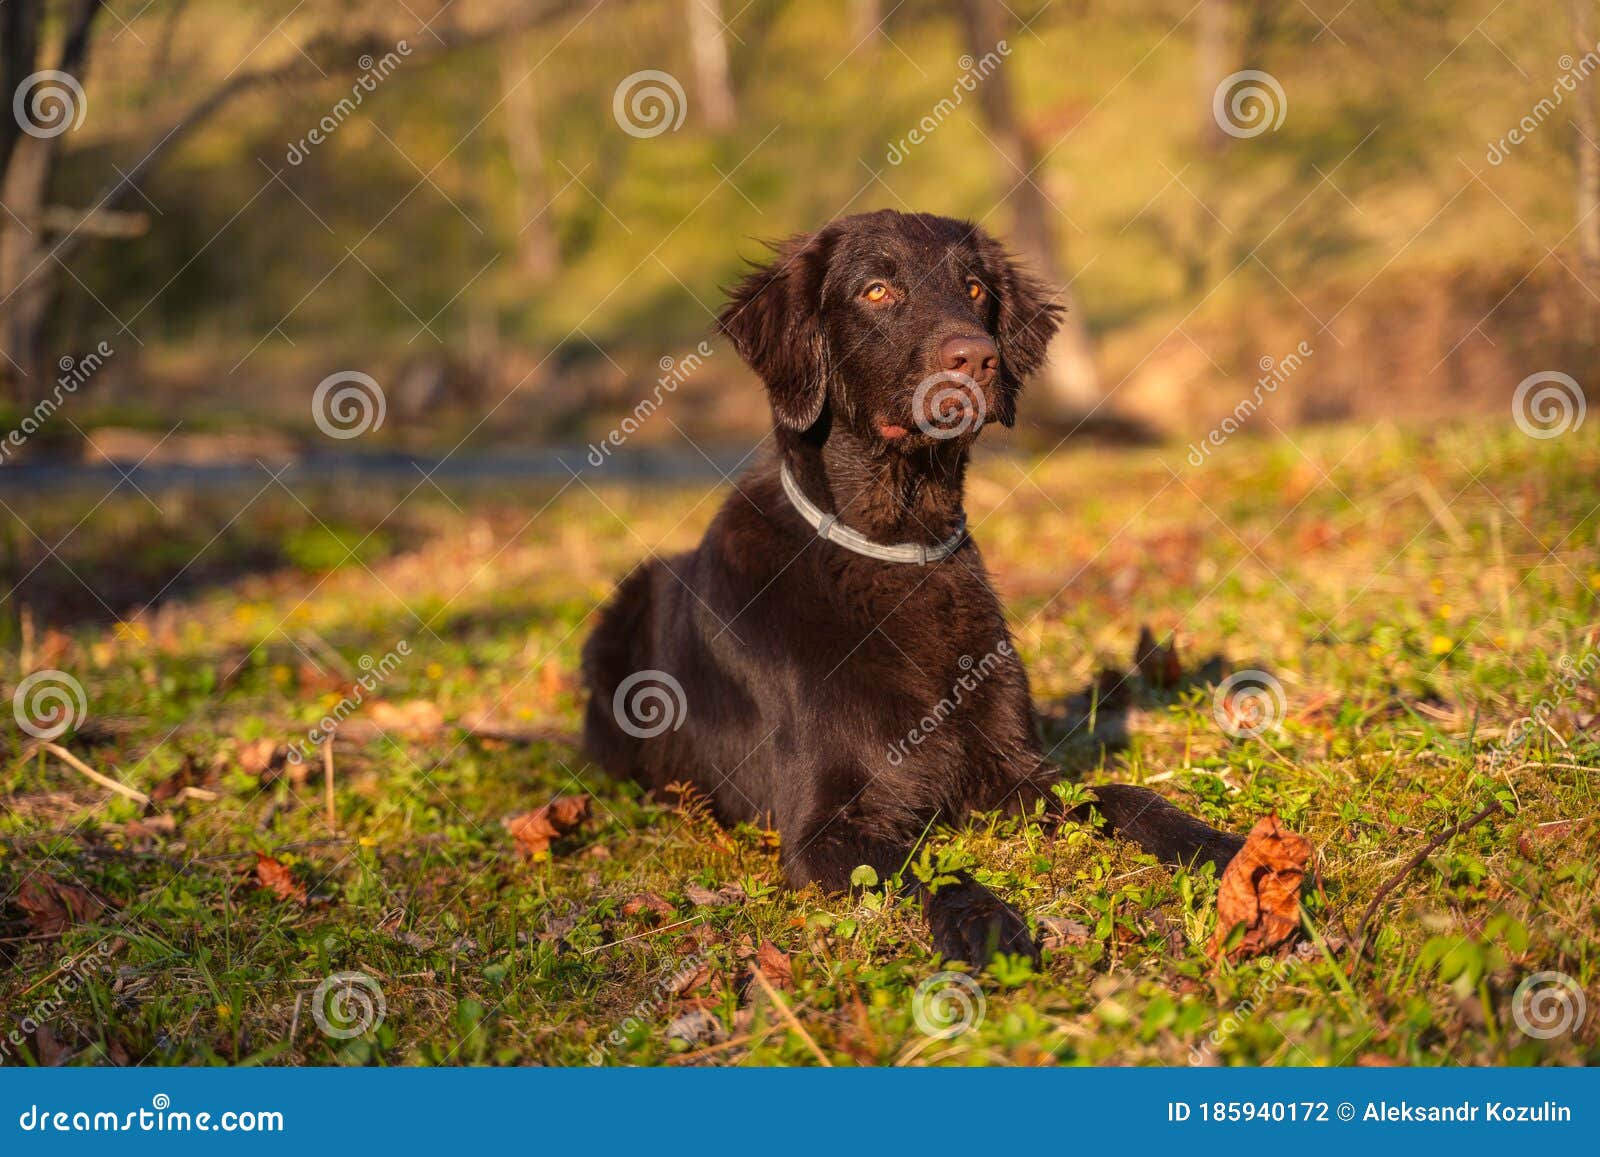 Beautiful Chocolate Flat Coated Retriever In Nature Stock Photo Image Of Outside Blue 185940172